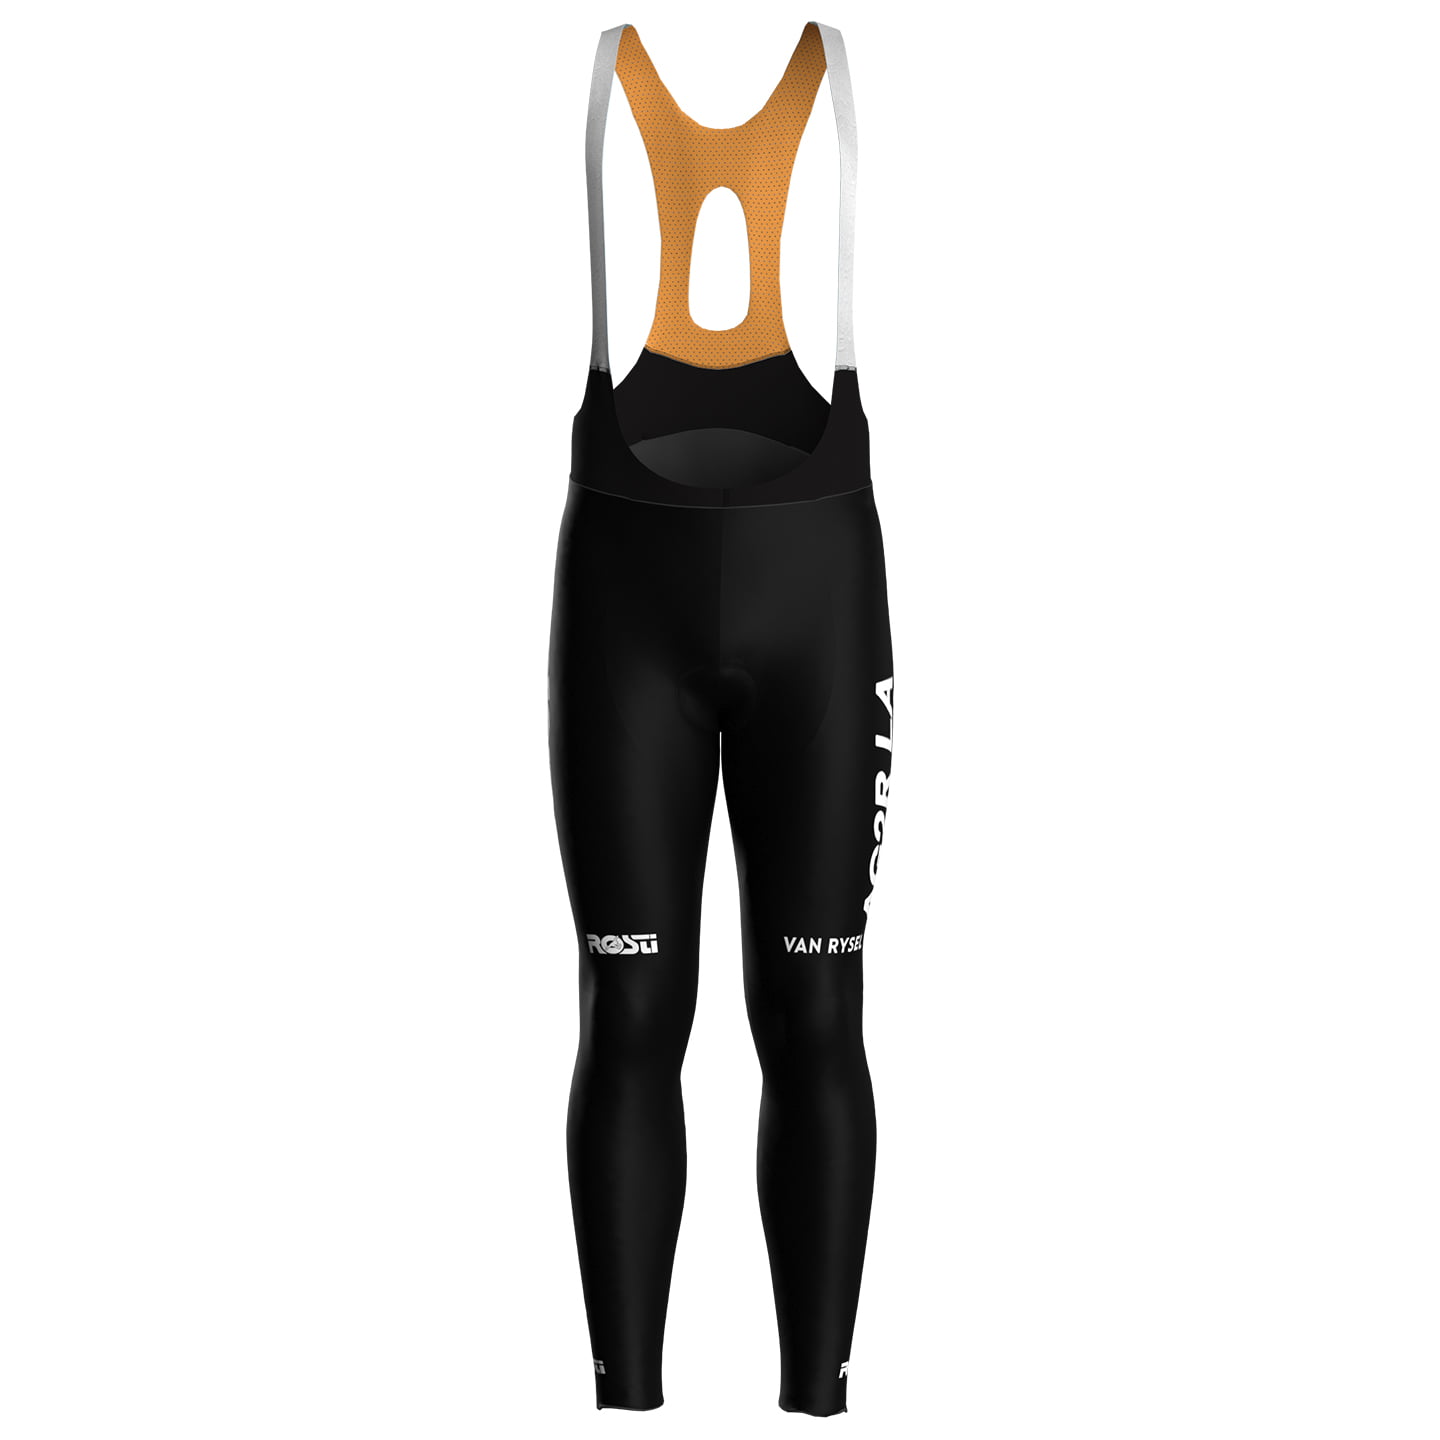 DECATHLON AG2R LA MONDIALE 2024 Bib Tights, for men, size M, Cycle tights, Cycling clothing